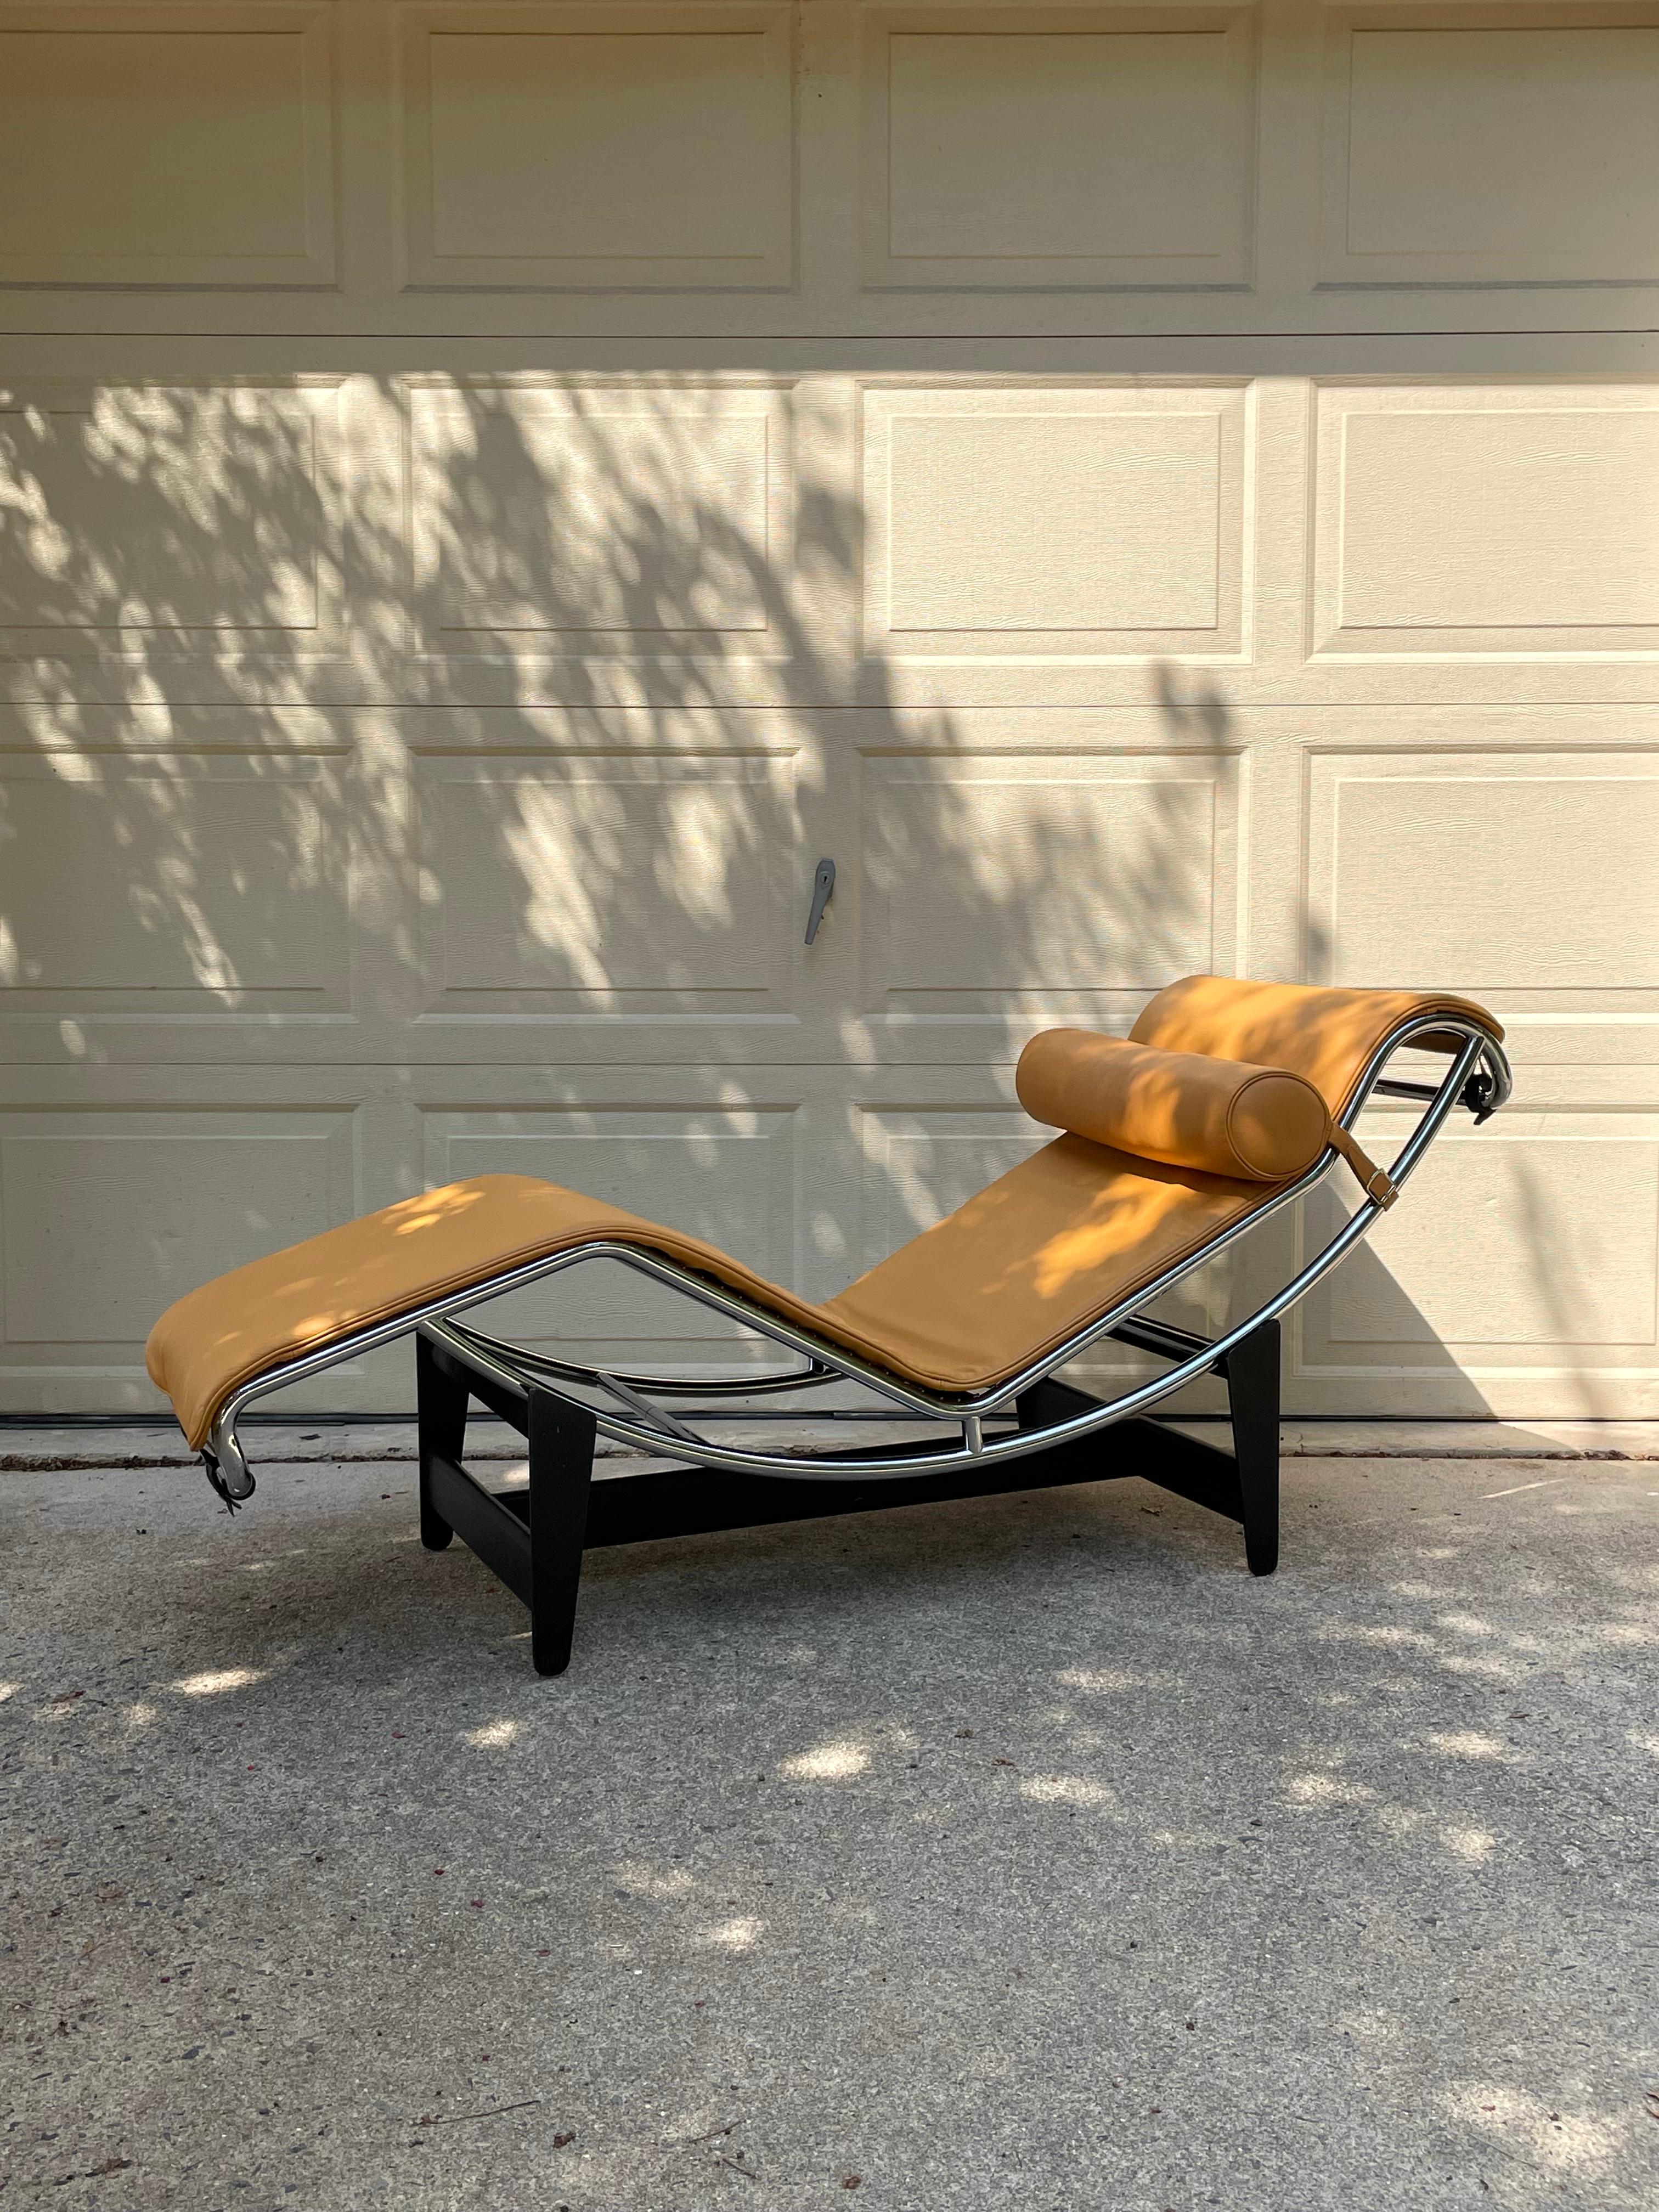 The “relaxing machine” — Designed to echo the natural curves of the human body in repose, the moveable frame of this iconic chaise adjusts along the base, following your every move from upright sitting to full recline. Known as the “relaxing